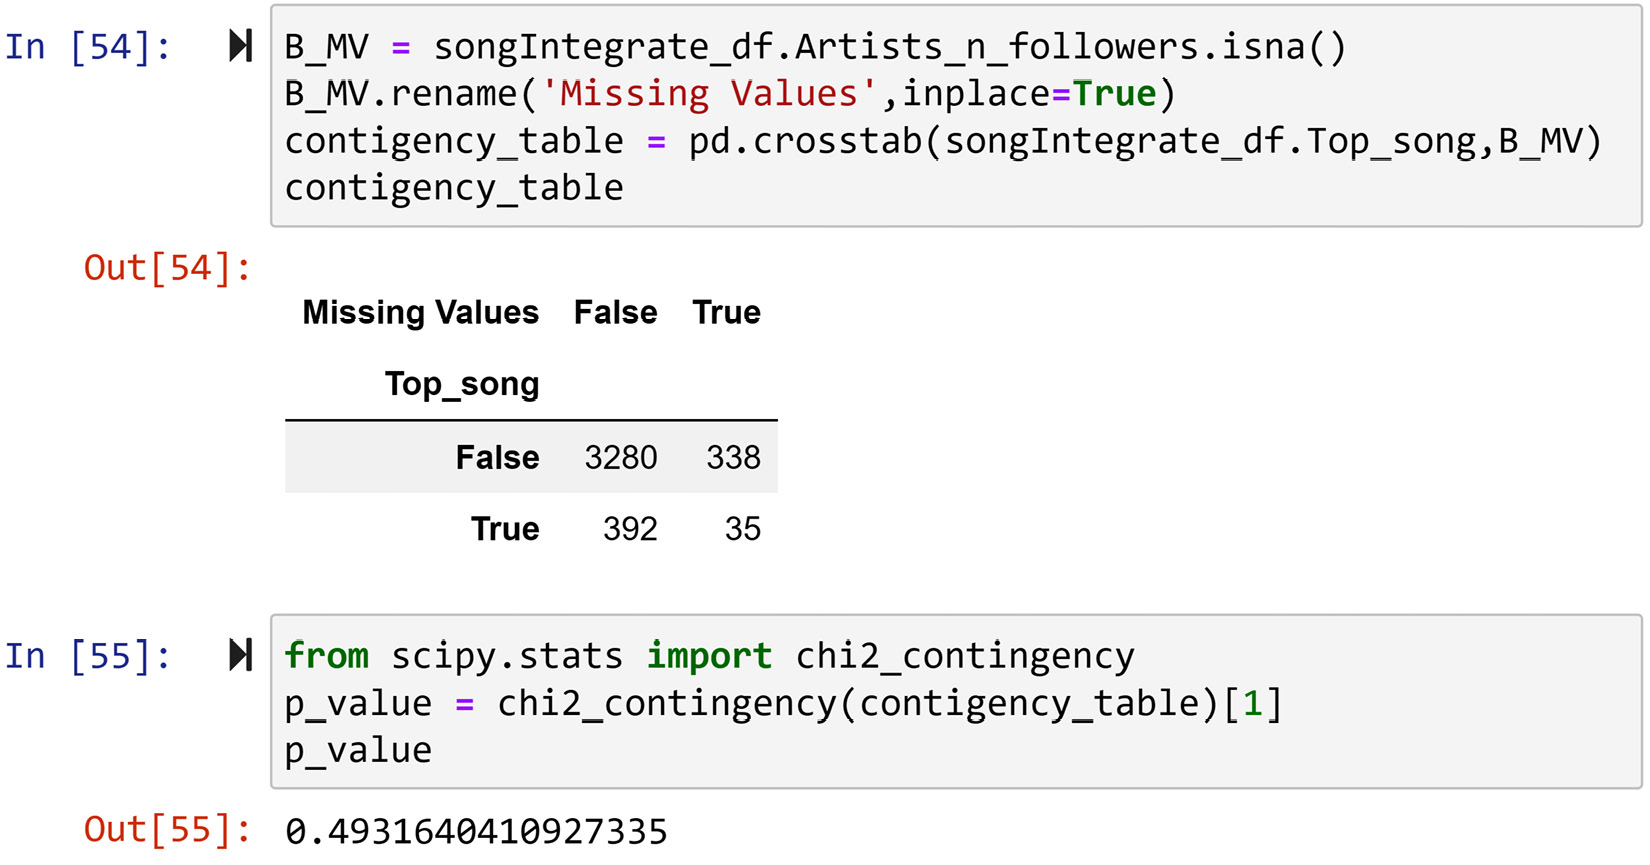 Figure 12.18 – The code and their output for studying if missing values in songIntegrate_df after integrating with artist_df are meaningfully connected to songIntegrate_df.Top_song 
